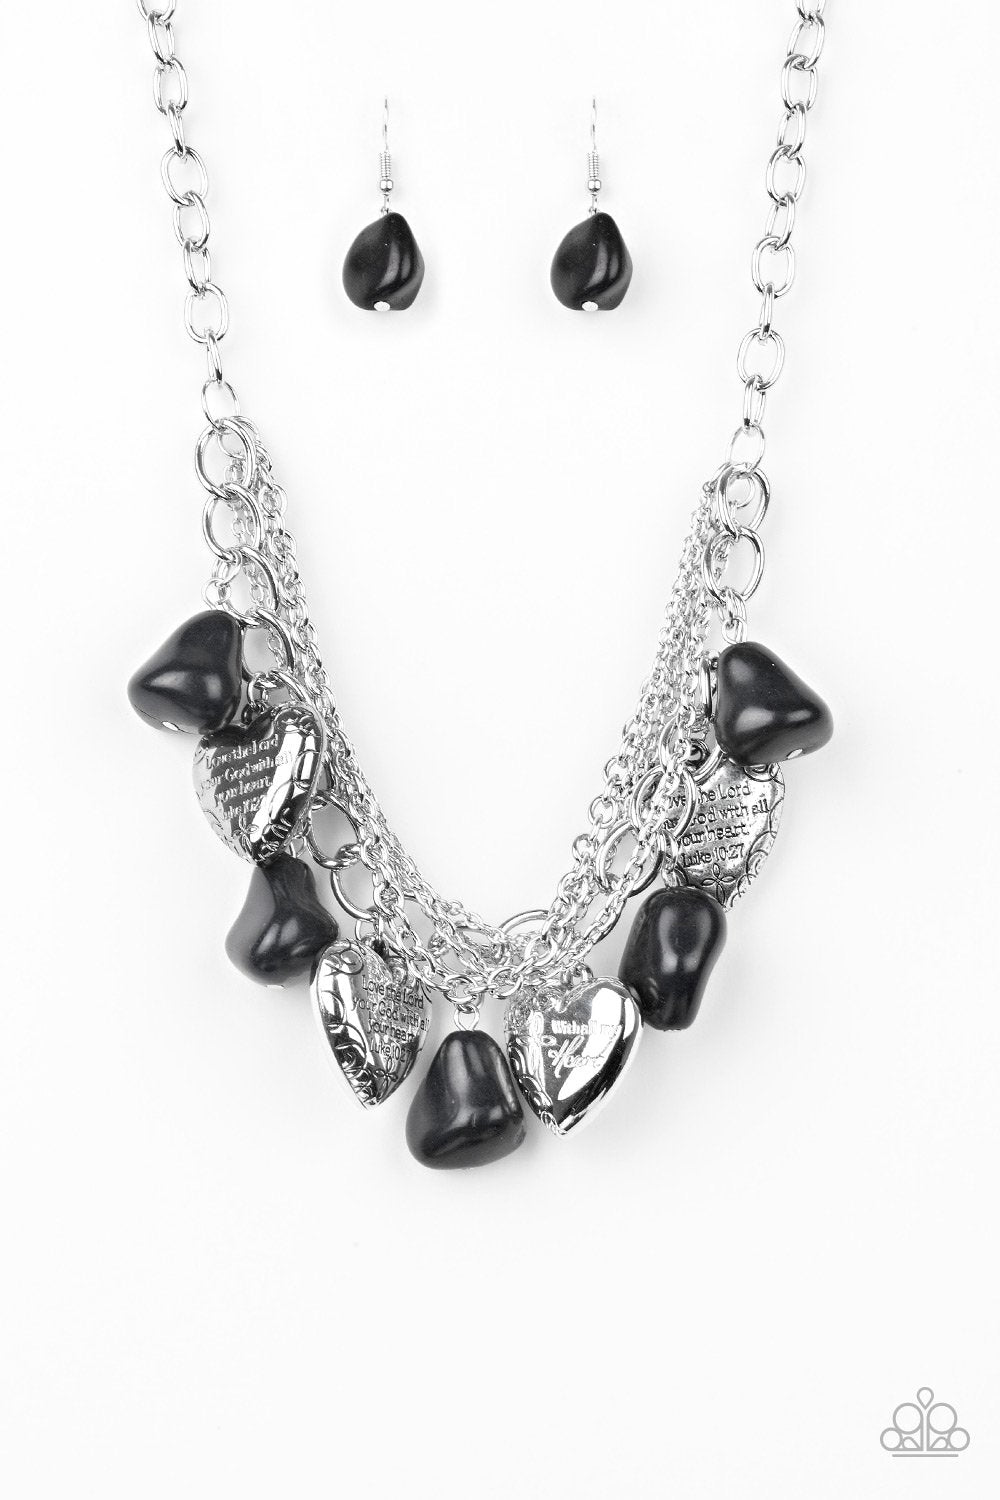 Change of Heart Black Stone and Silver Heart Necklace - Paparazzi Accessories- lightbox - CarasShop.com - $5 Jewelry by Cara Jewels